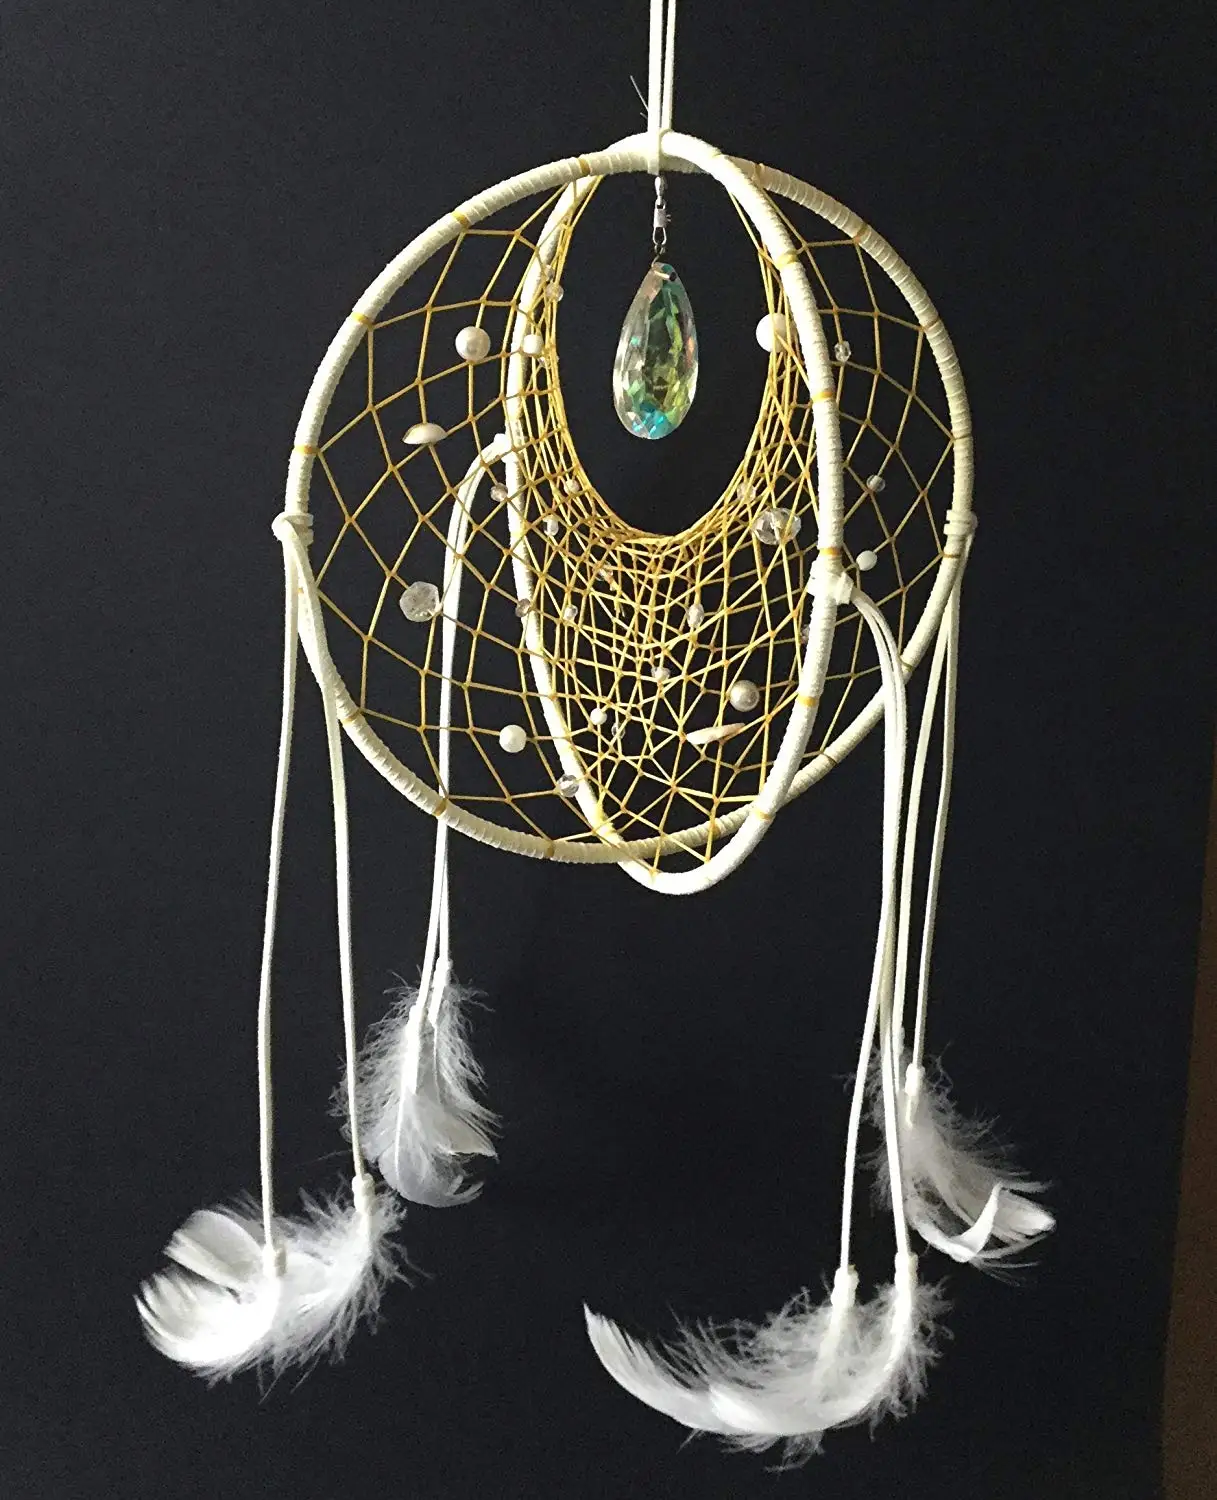 blue and white dream catchers